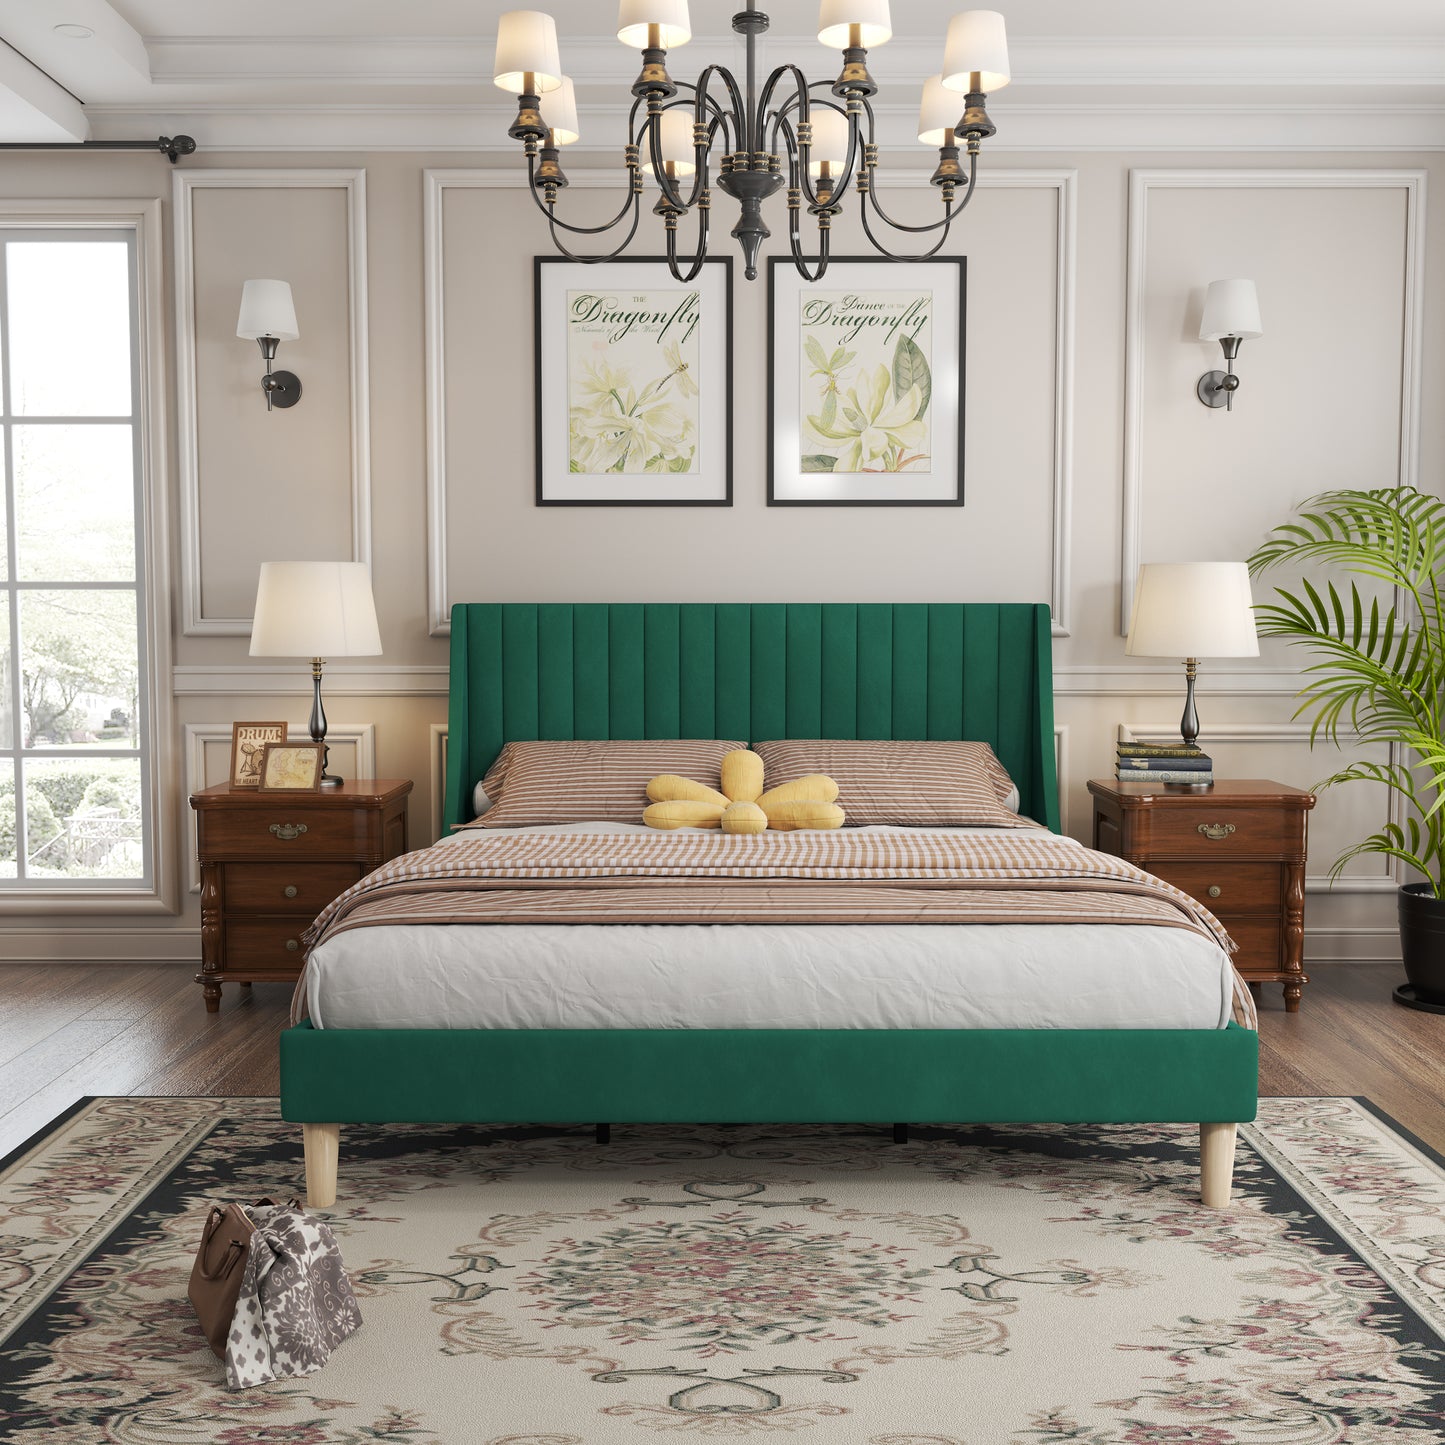 Molblly King Size Platform Bed Frame with Upholstered Headboard, Strong Frame, and Wooden Slats Support, Non-Slip, and Noise-Free, No Box Spring Needed, Easy Assembly, Green